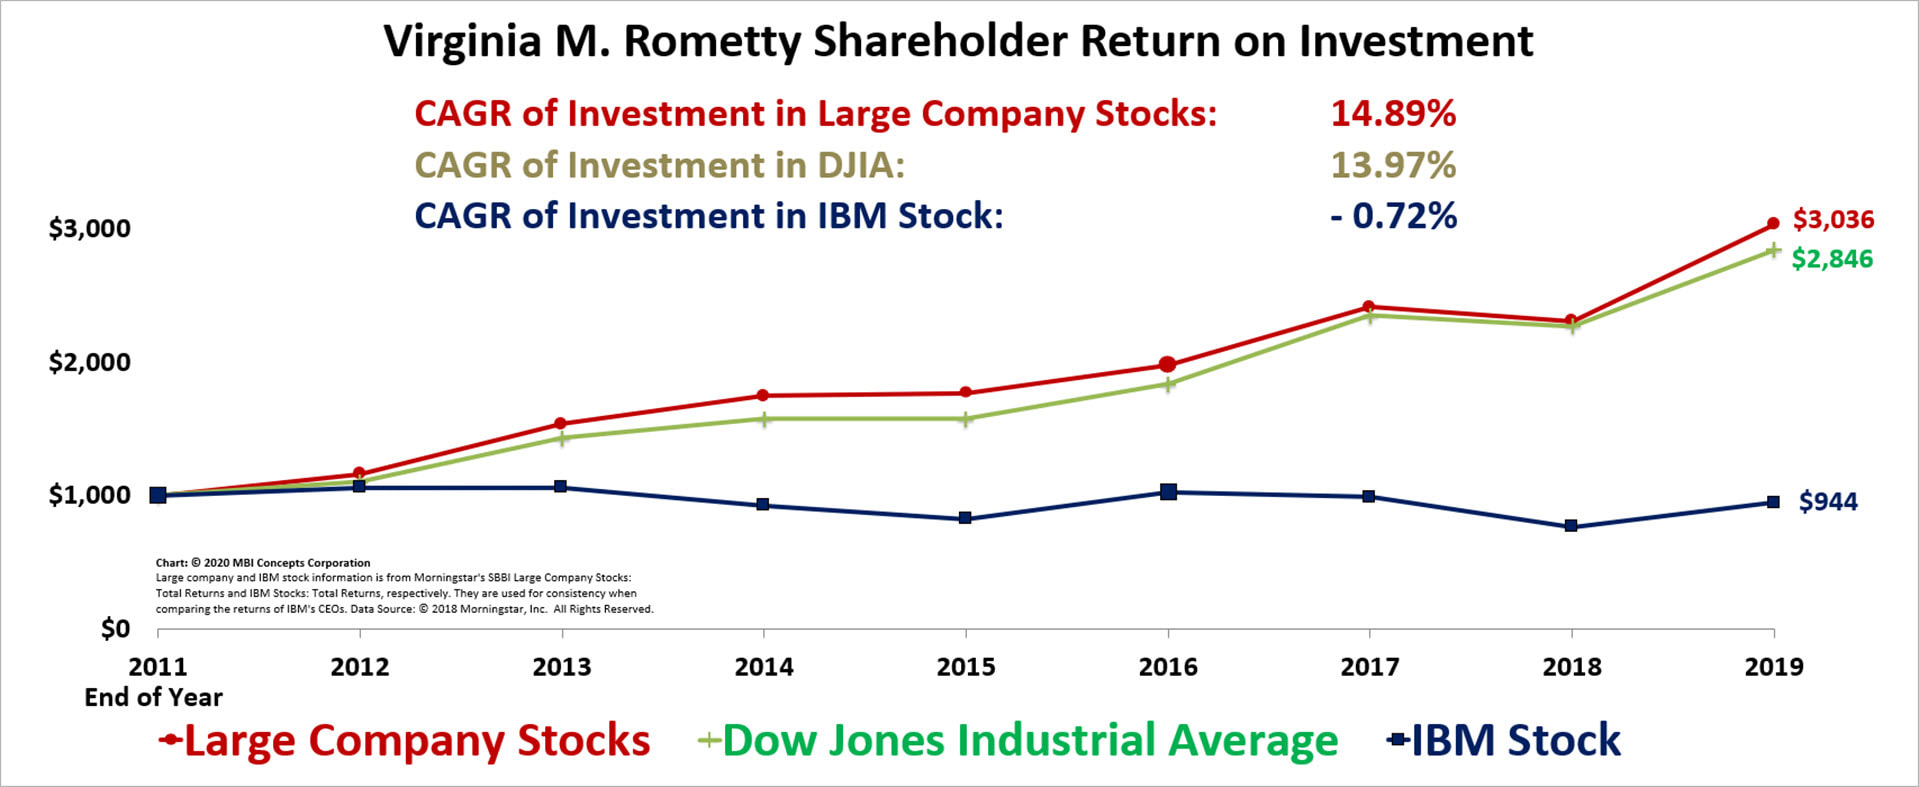 A color line graph showing IBM Stock Total Return on Investment for Virginia M. (Ginni) Rometty from 2012 to 2019 compared with a large company stock index.